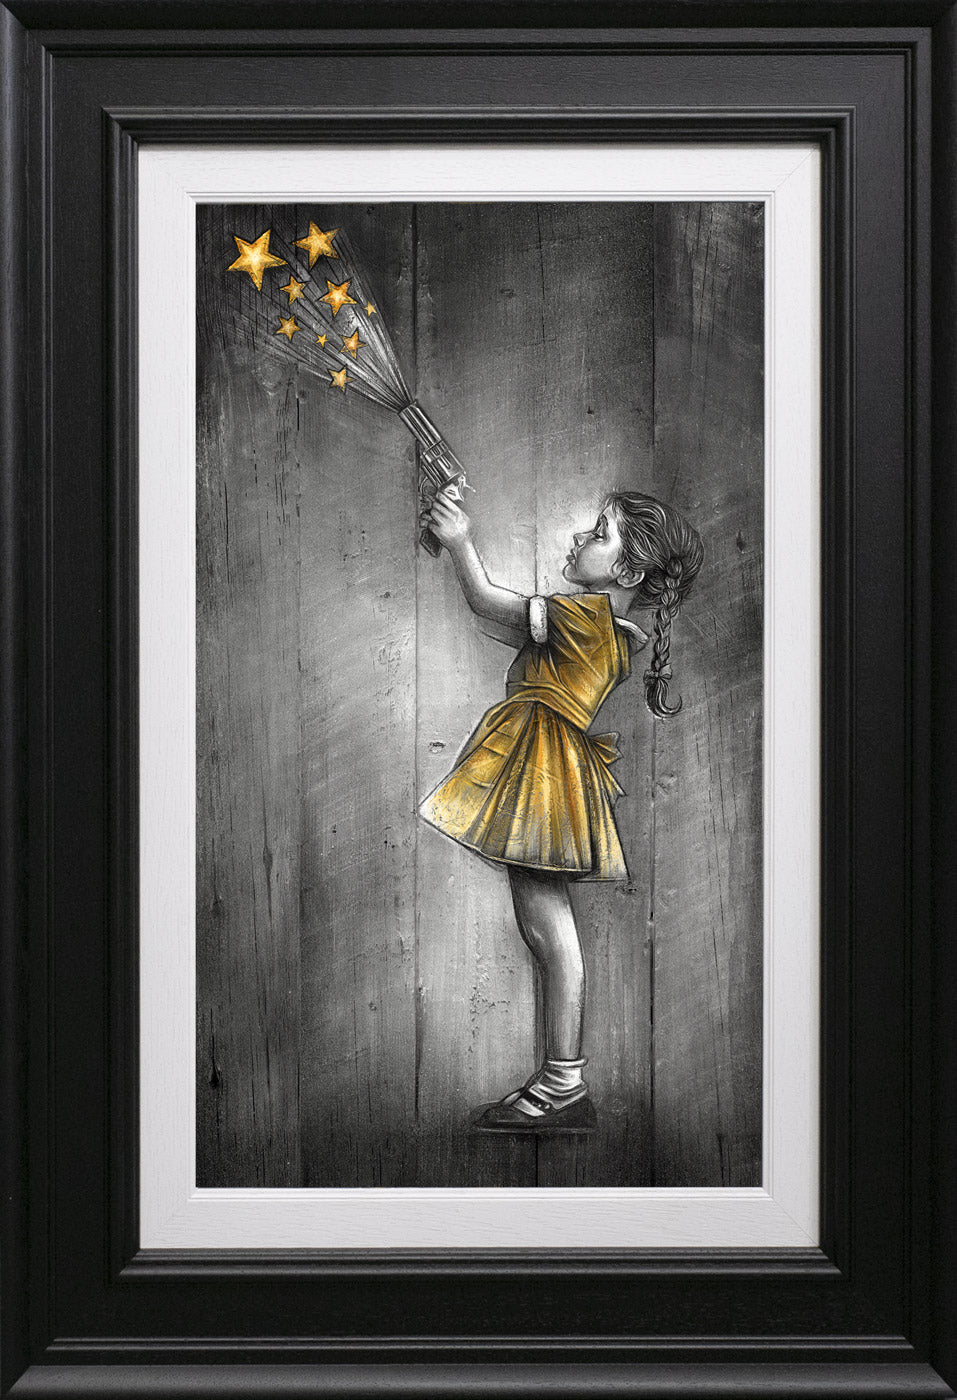 Shooting Stars - Limited Edition on Canvas